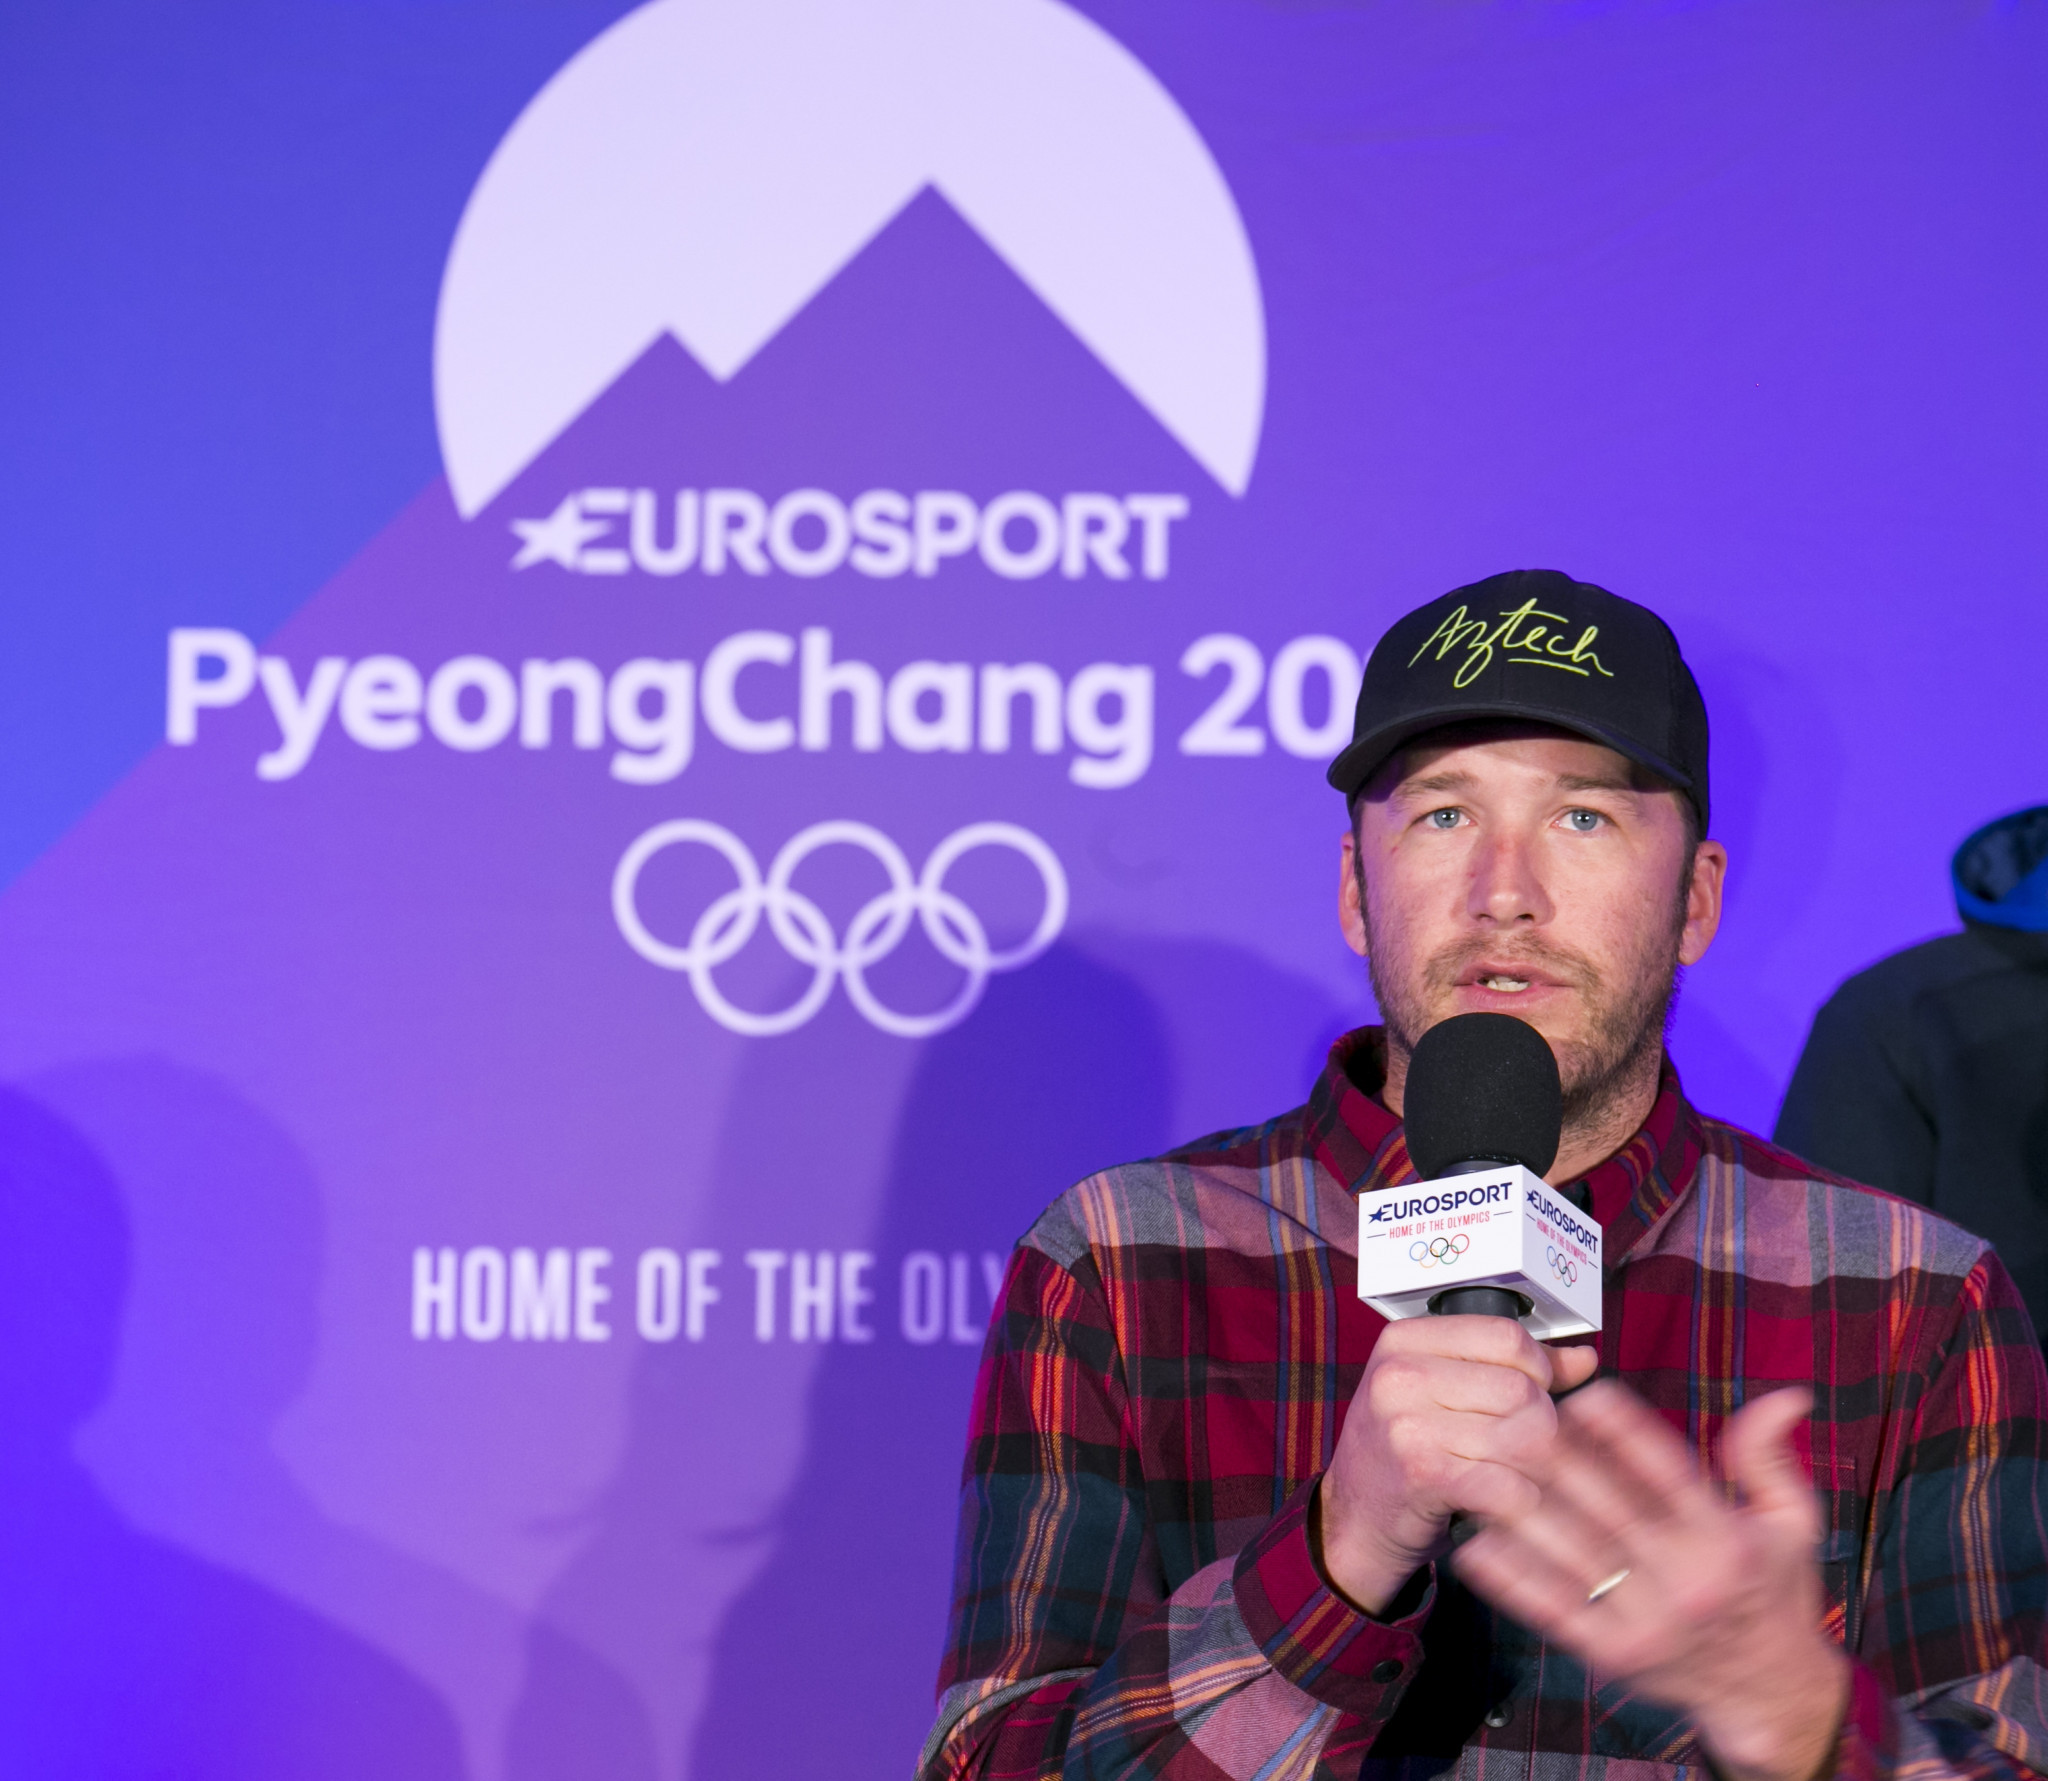 Six-time Olympic medal-winning skier Bode Miller has been added to Eurosport’s line-up of more than 150 winter sports experts and commentators for Pyeongchang 2018 ©Getty Images